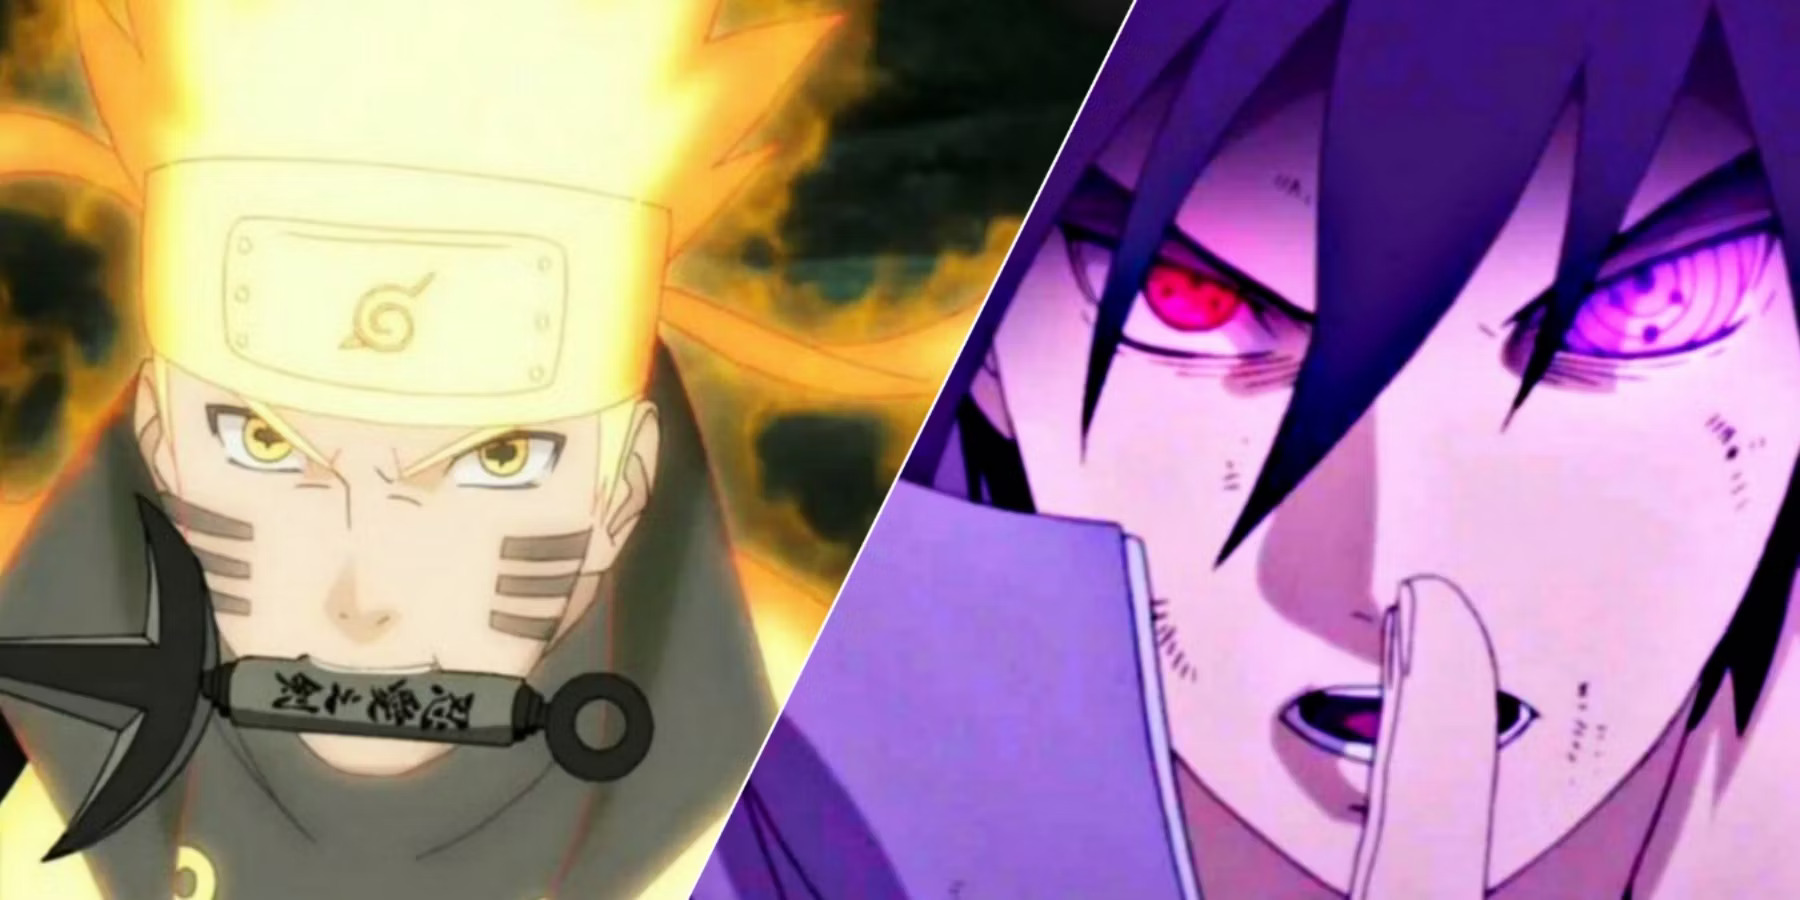 Boruto-spoilers-Review-The-Latest-Manga-Chapter-‘Spoil-Everything-For-Borutos-Growth